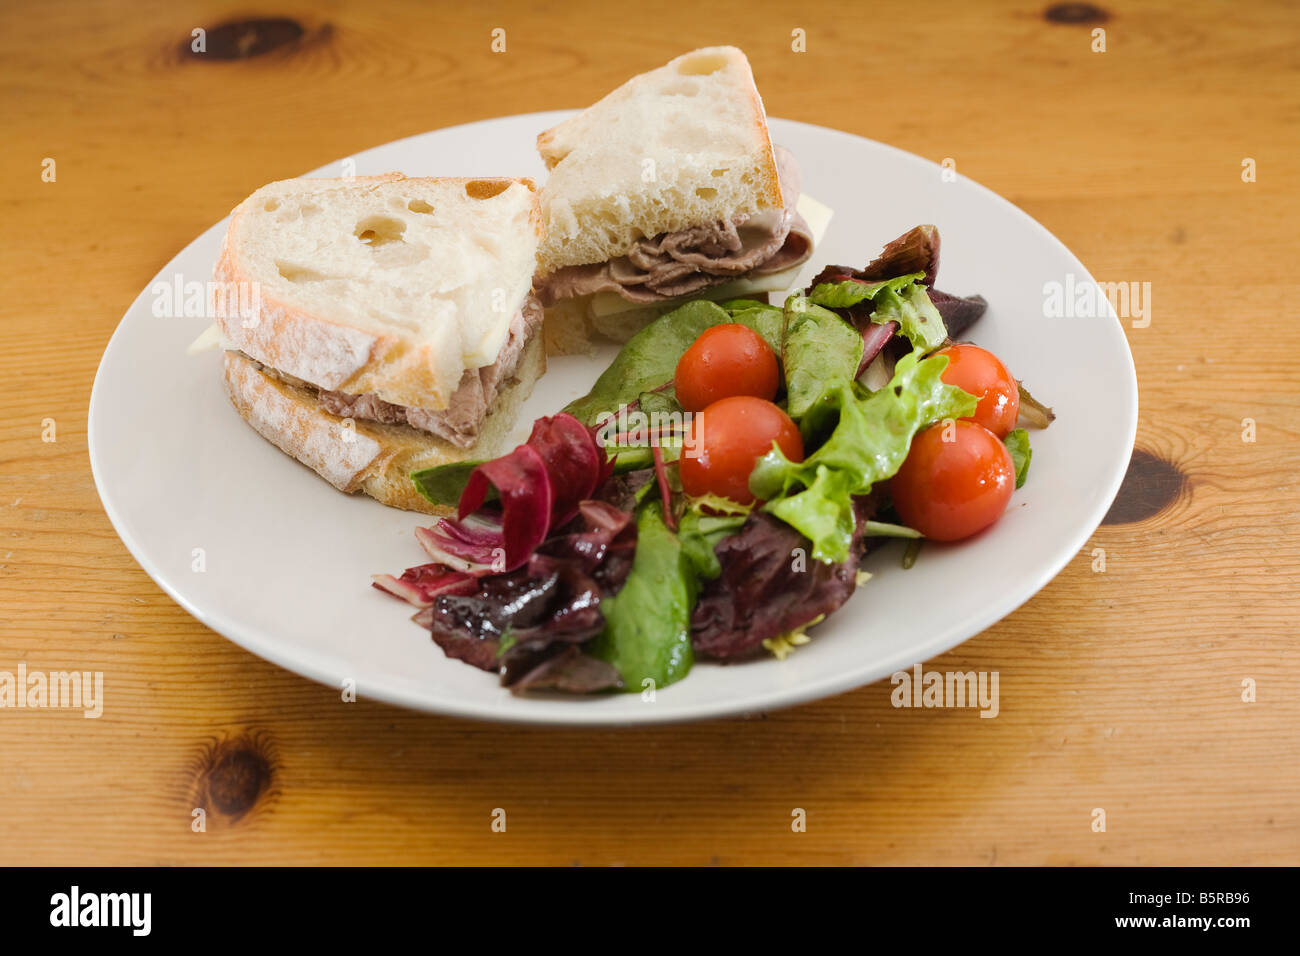 Gourmet sandwich and salad Stock Photo